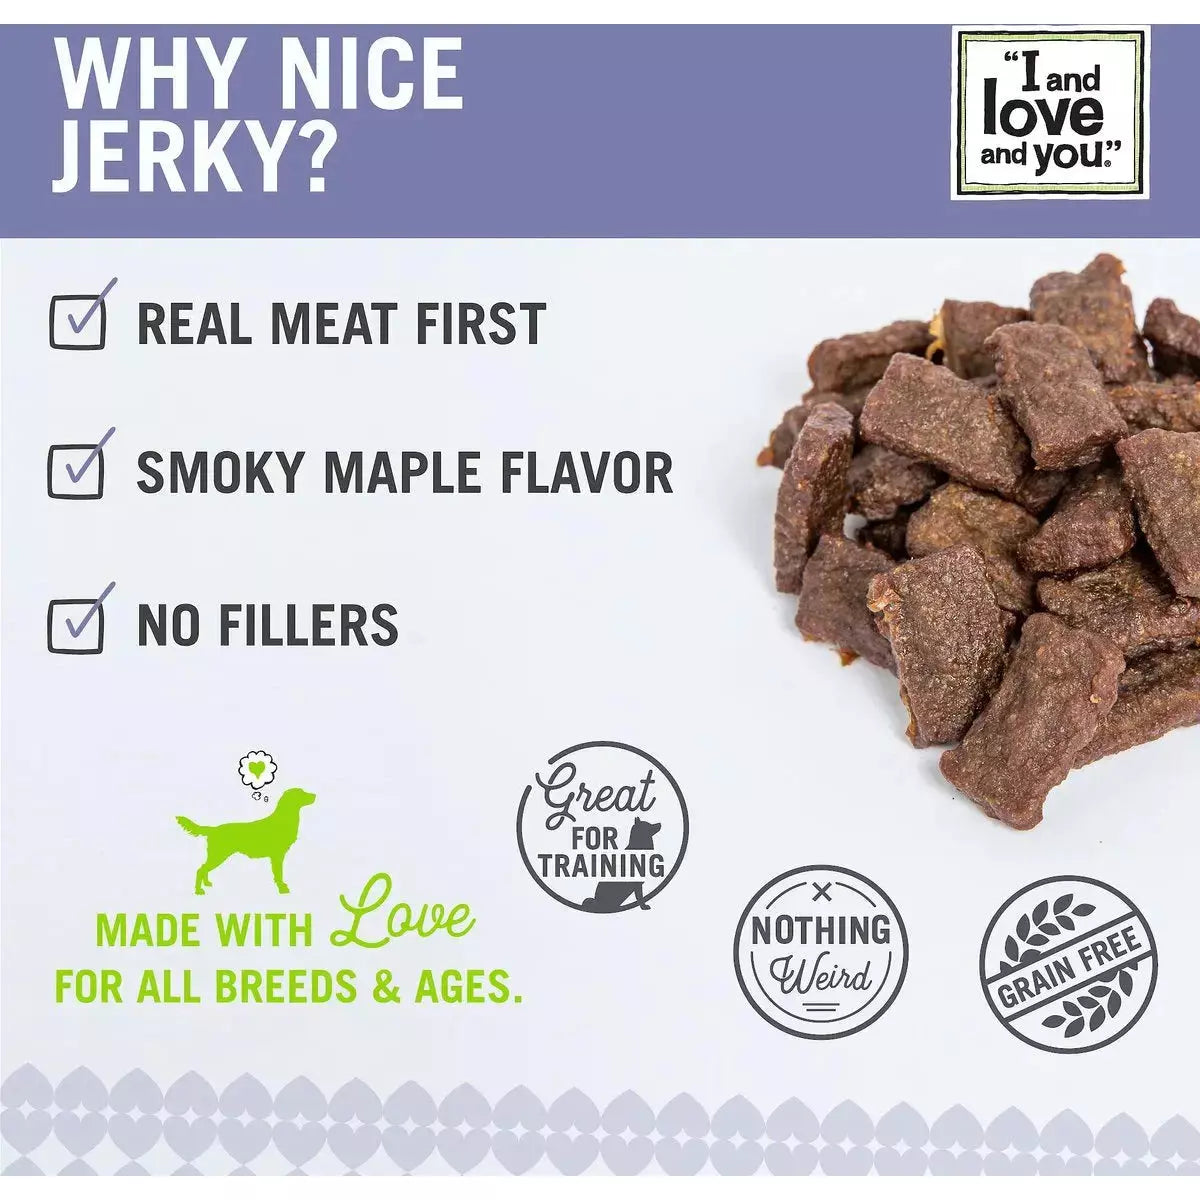 I and Love and You Nice Jerky Bites Grain-Free Dog Treats I and Love and You